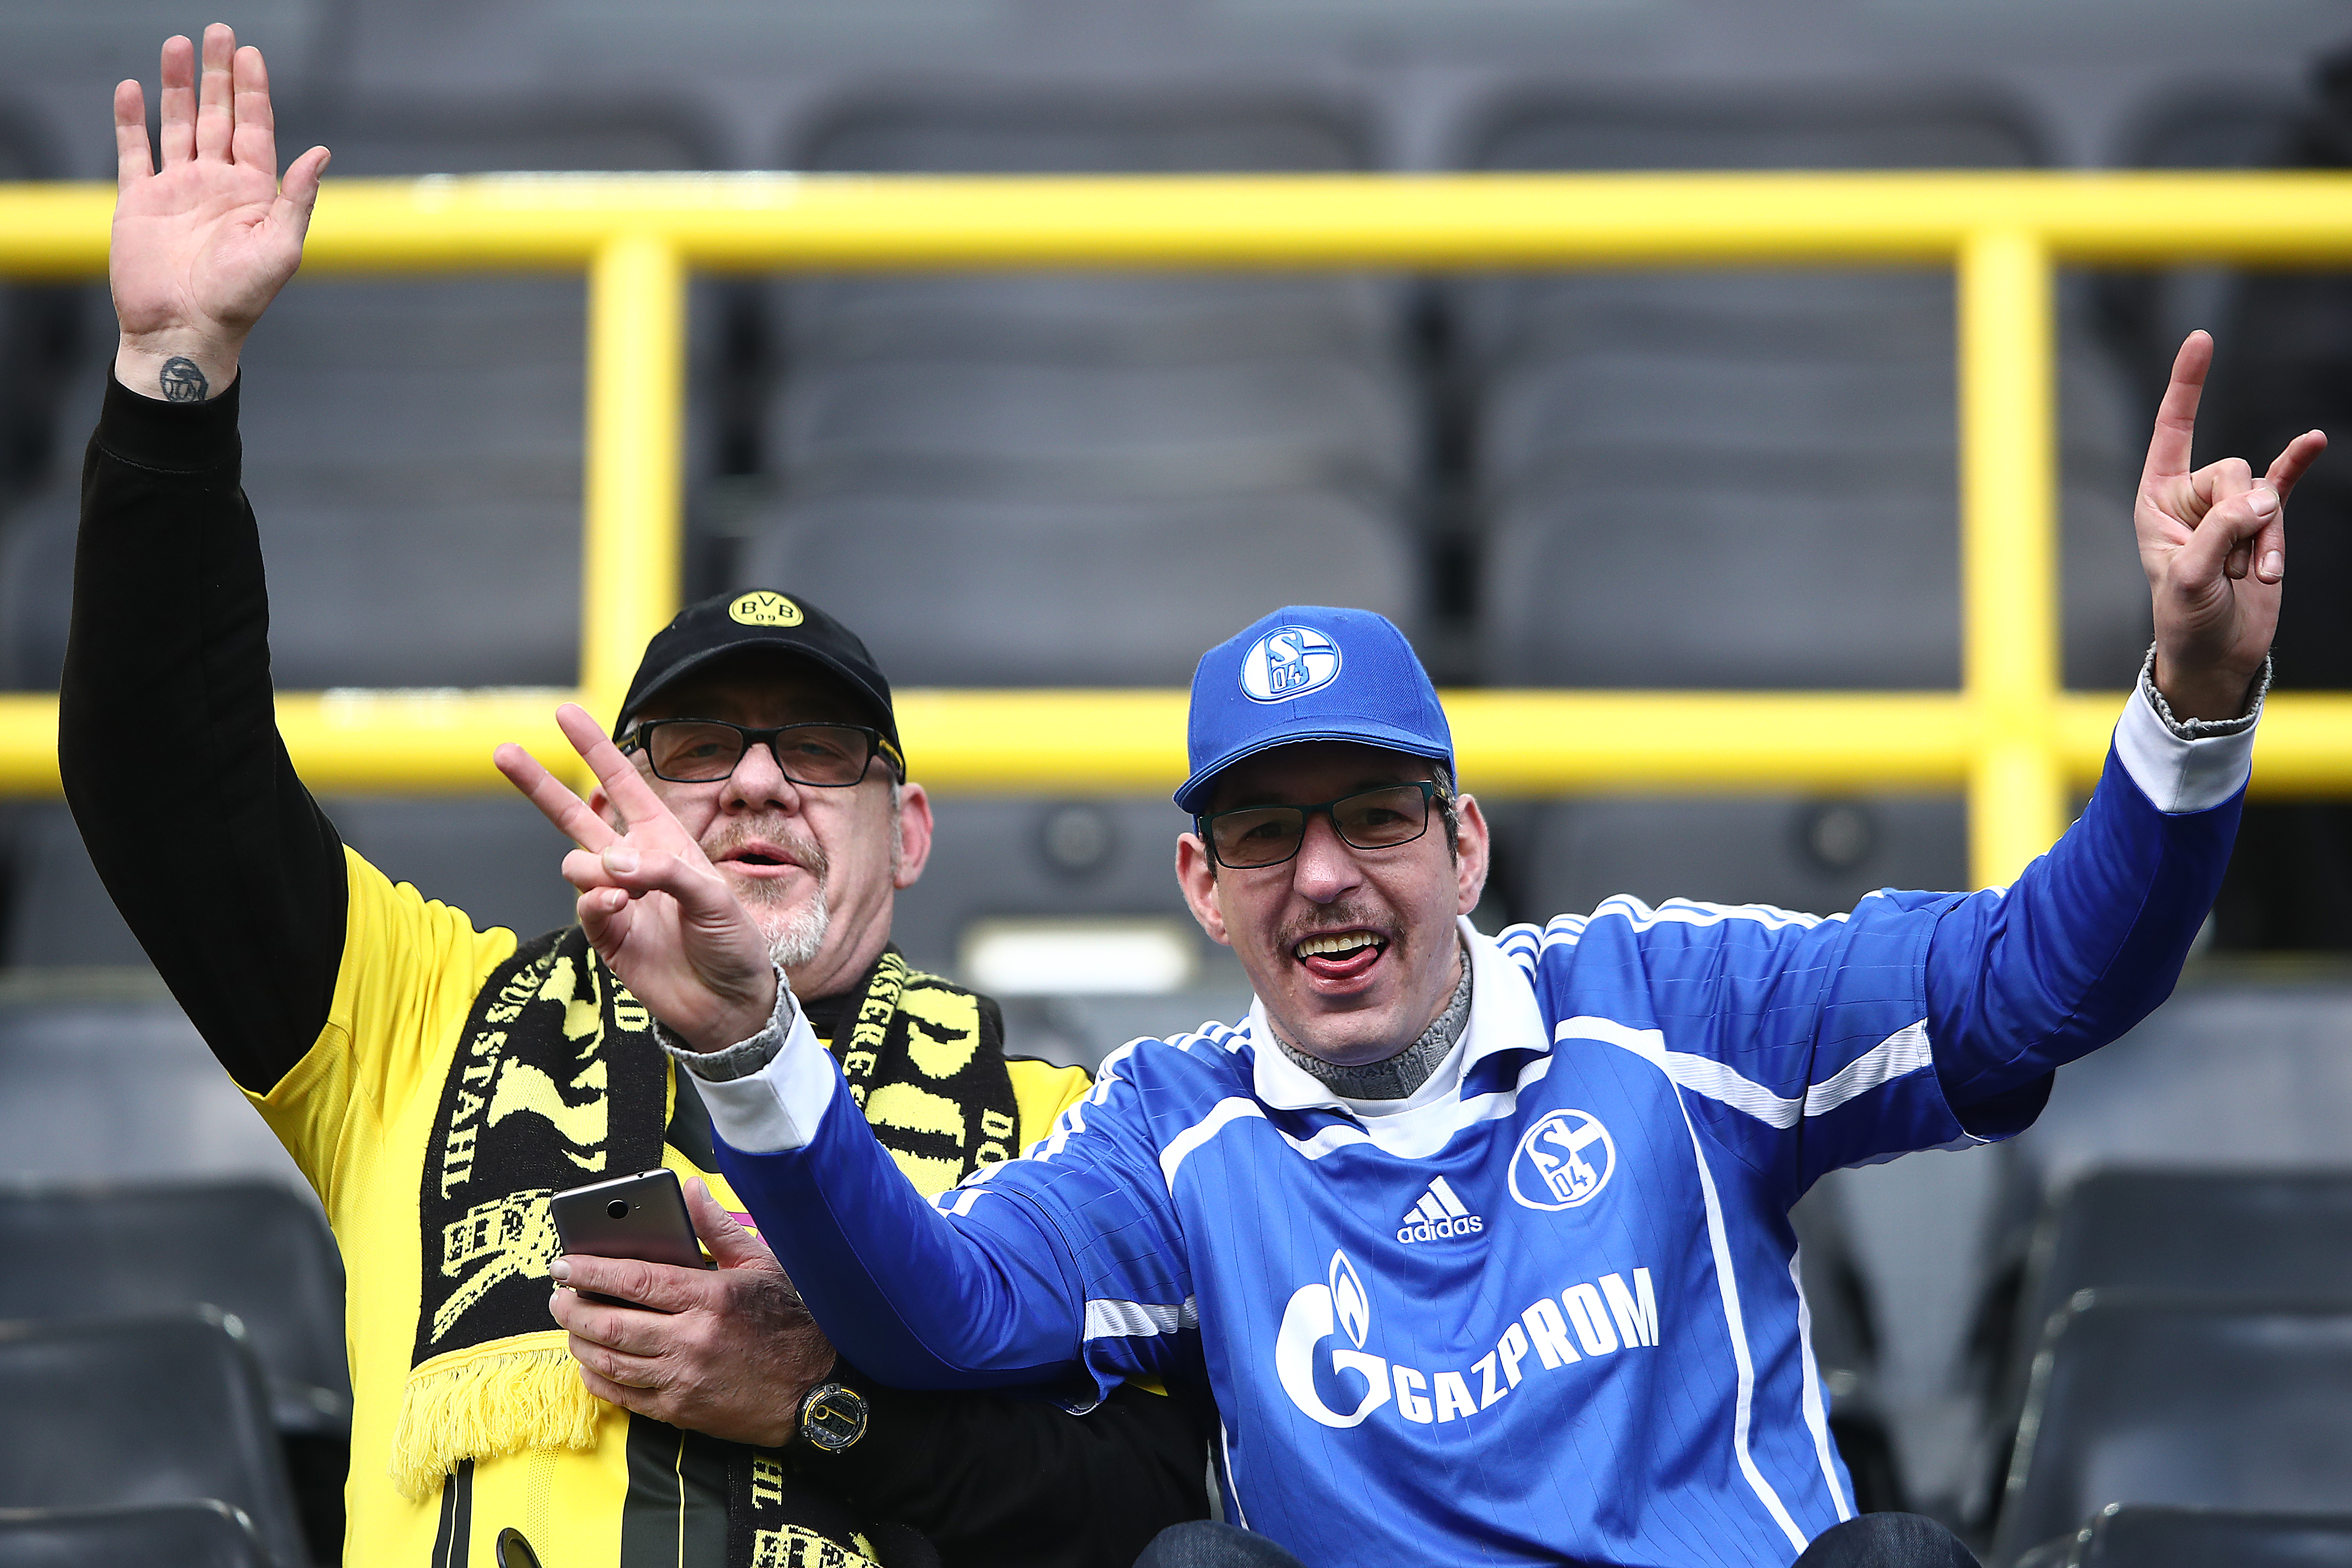 DORTMUND, GERMANY - NOVEMBER 25: Supporters of both Schalke (r) and Dortmund sit happily next to each other and wave and smile, before the Bundesliga match between Borussia Dortmund and FC Schalke 04 at Signal Iduna Park on November 25, 2017 in Dortmund, Germany. (Photo by Alex Grimm/Bongarts/Getty Images)